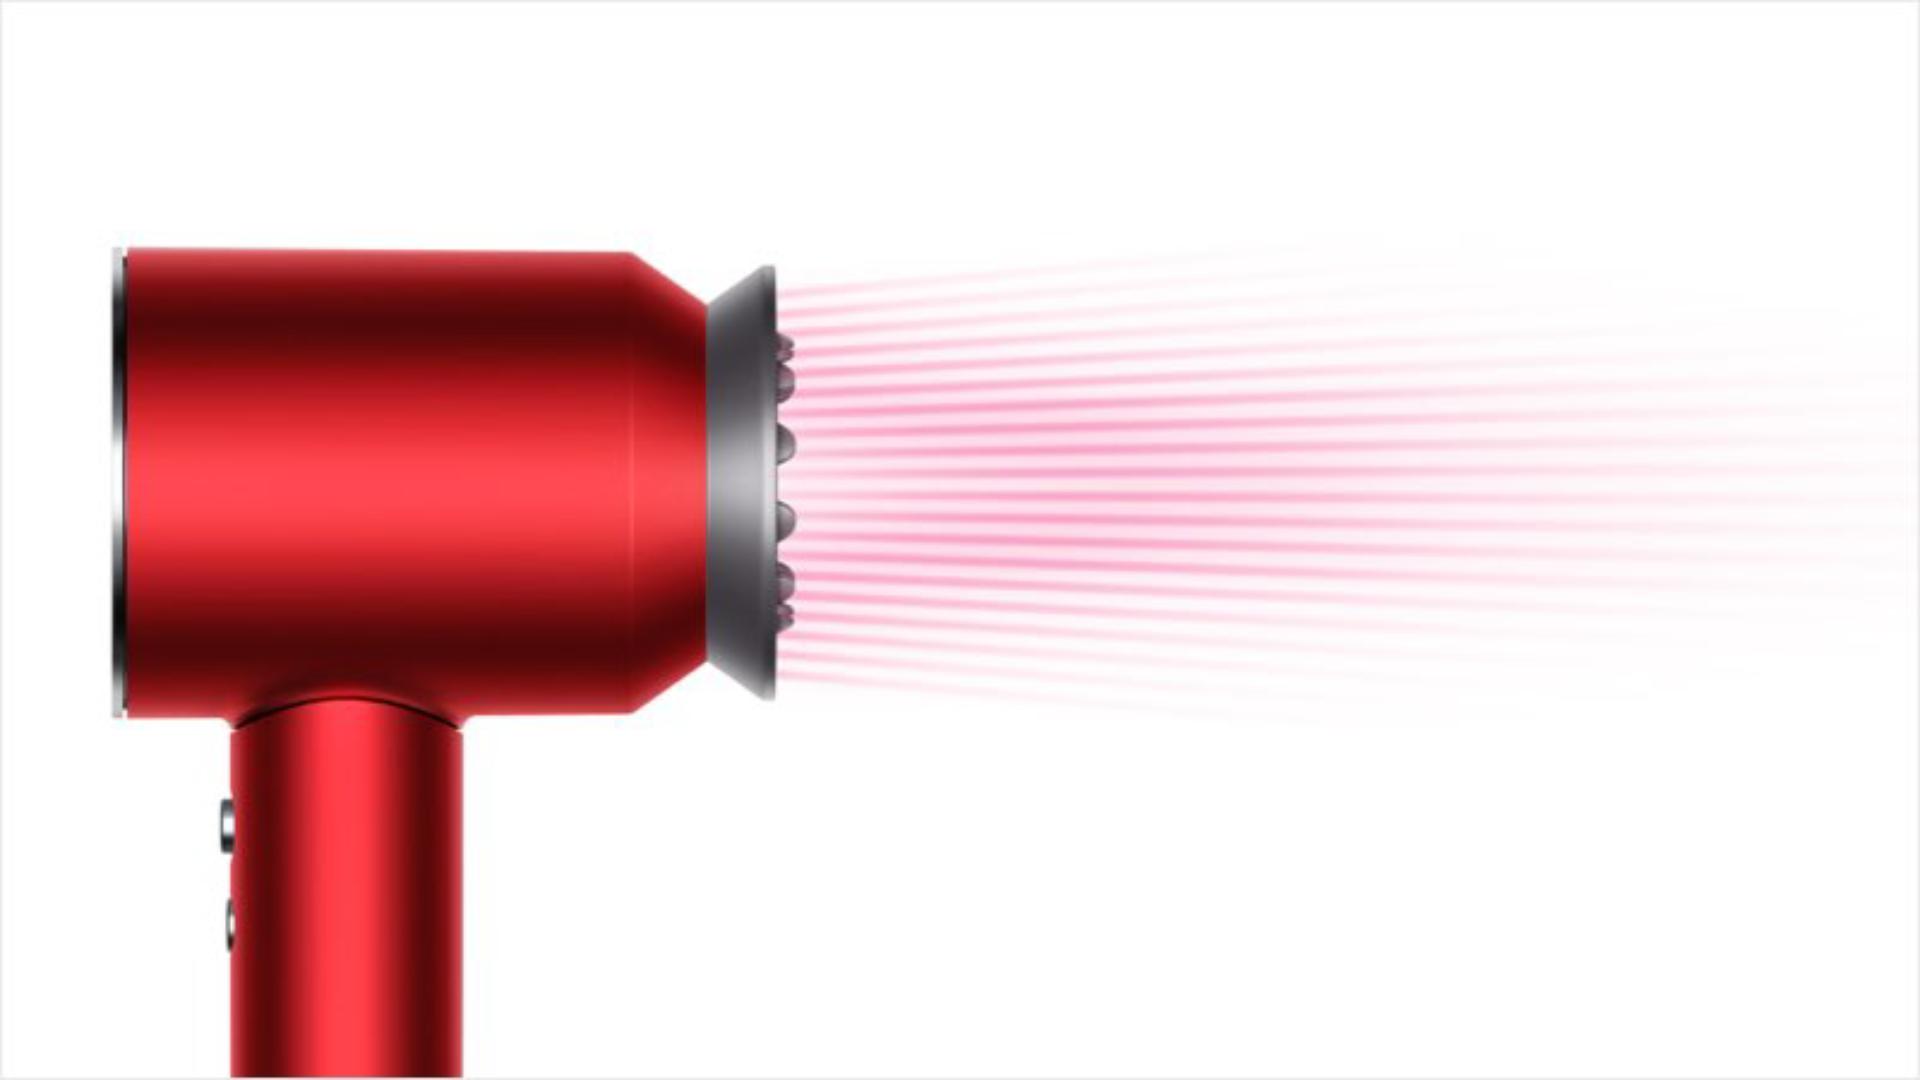 Dyson Supersonic™ hair dryer with Gentle air attachment